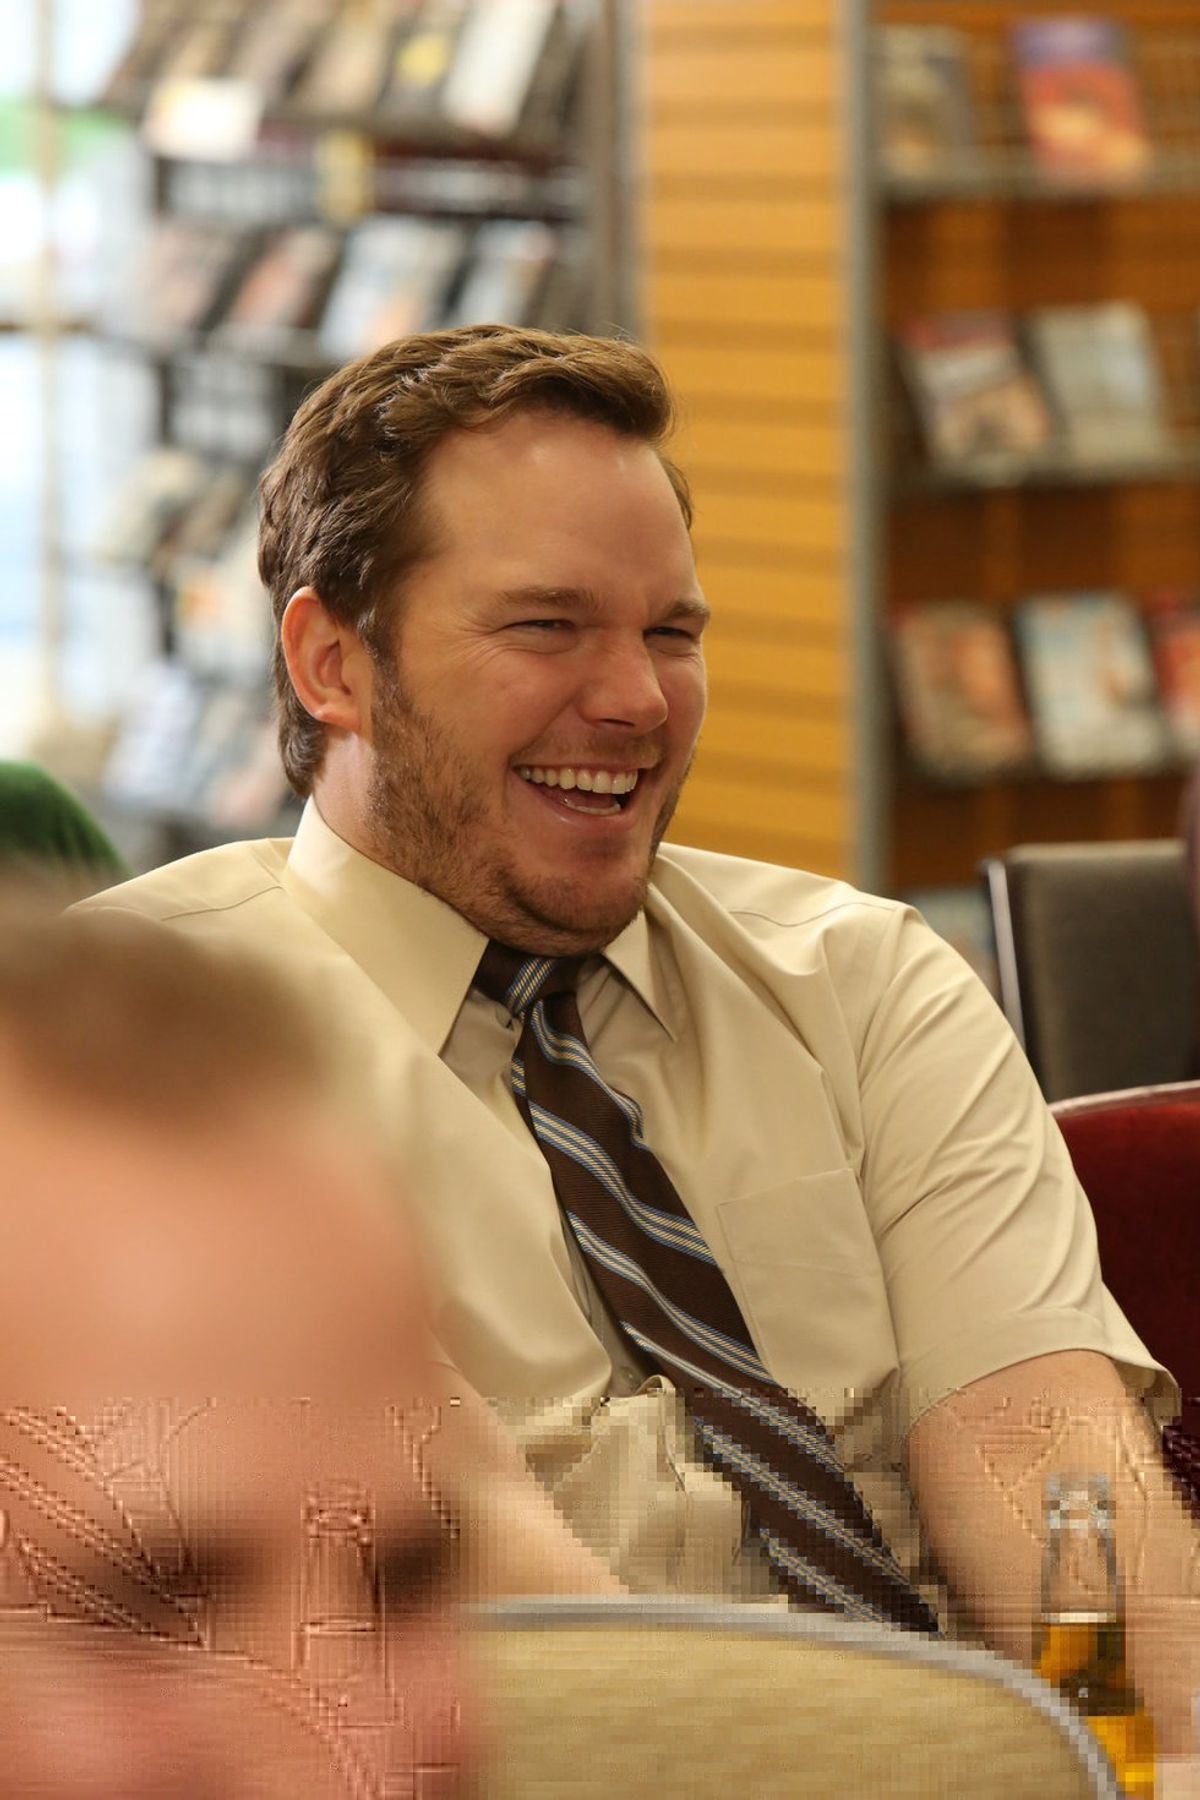 11 Things Soon-To-Be Graduates Think As Told By Andy Dwyer